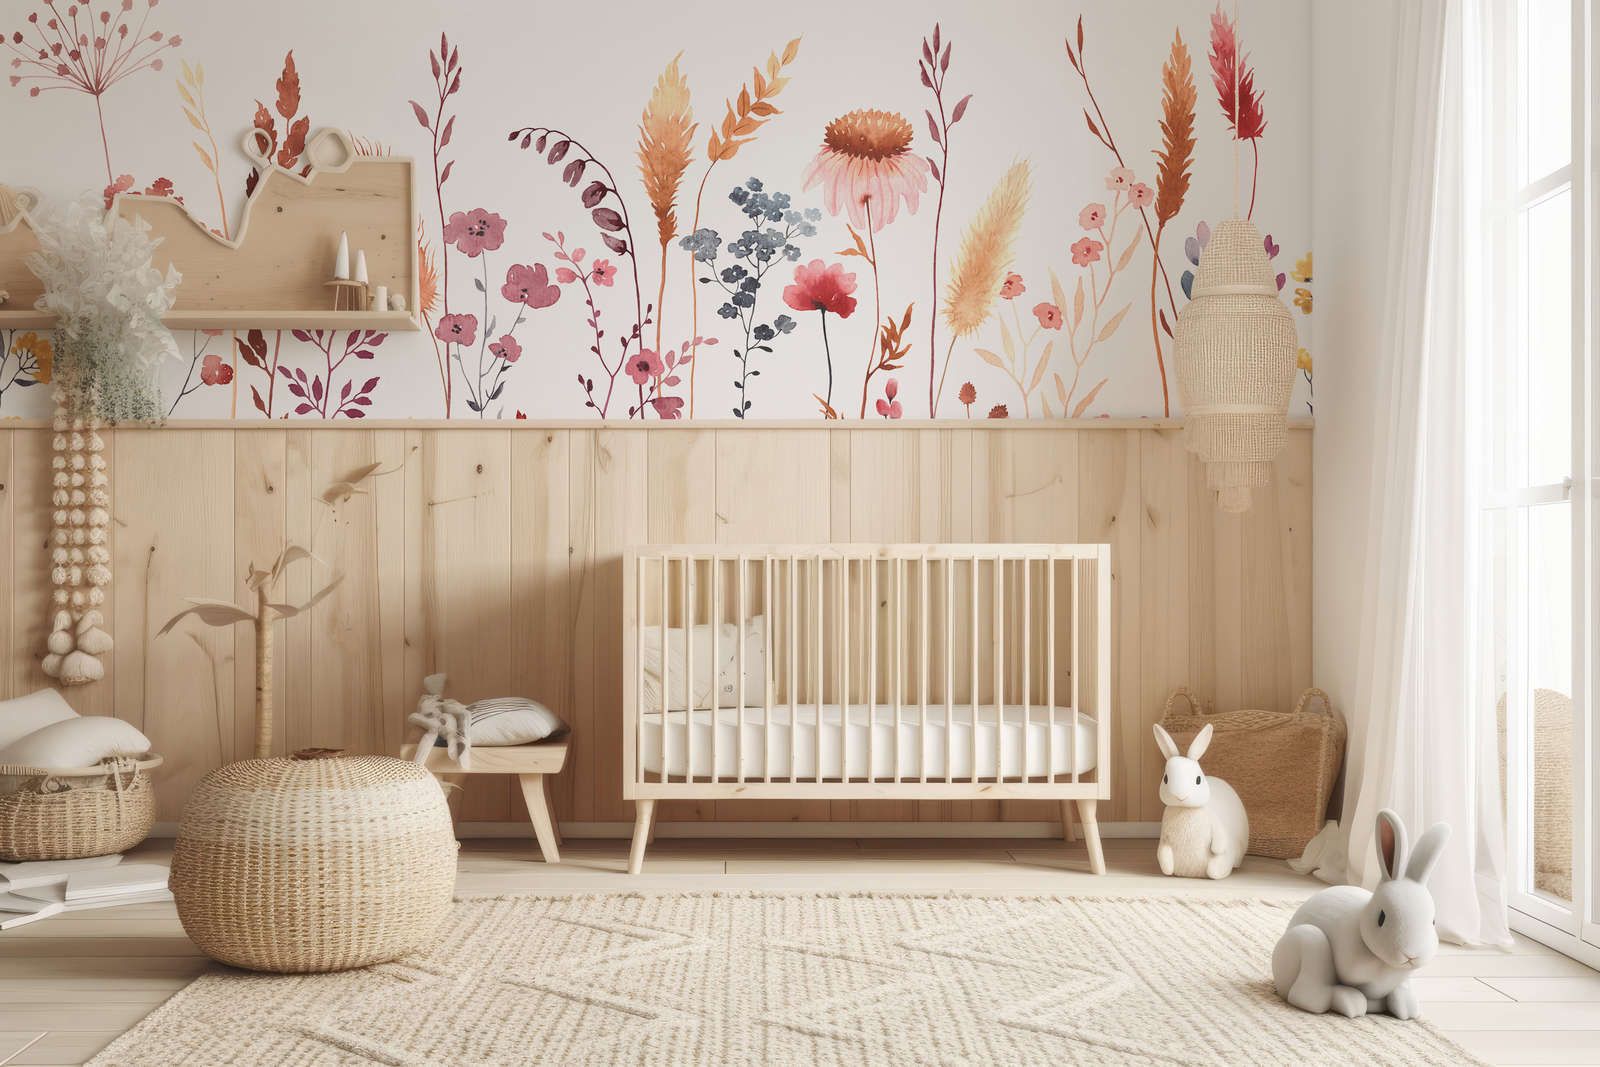             Children's Room Wallpaper with Leaves and Grasses - Textured non-woven
        